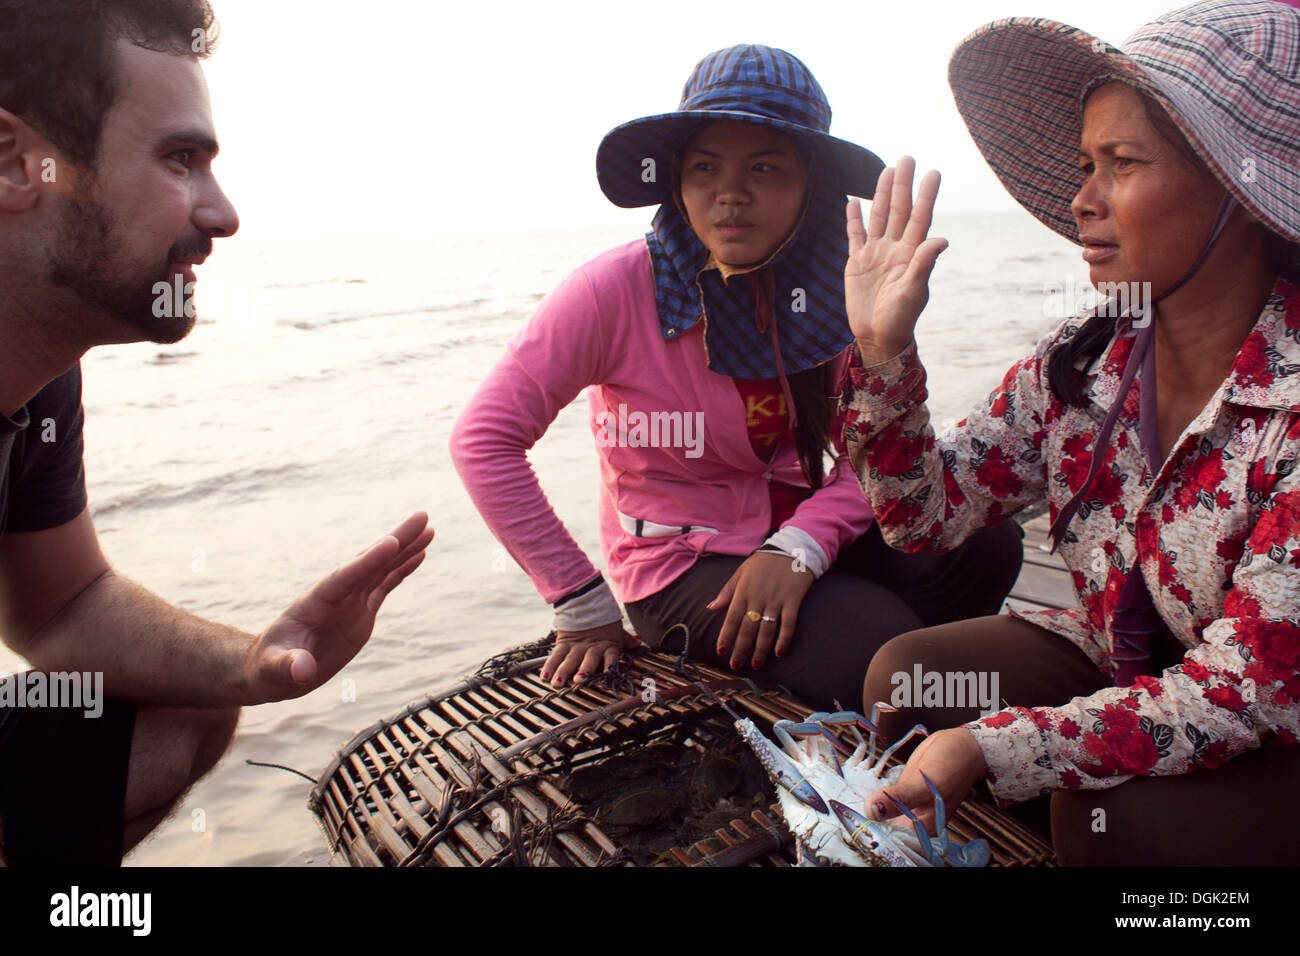 Women sell crabs at the crab market in the resort town of Kep, Cambodia. Photos © Dennis Drenner 2013. Stock Photo